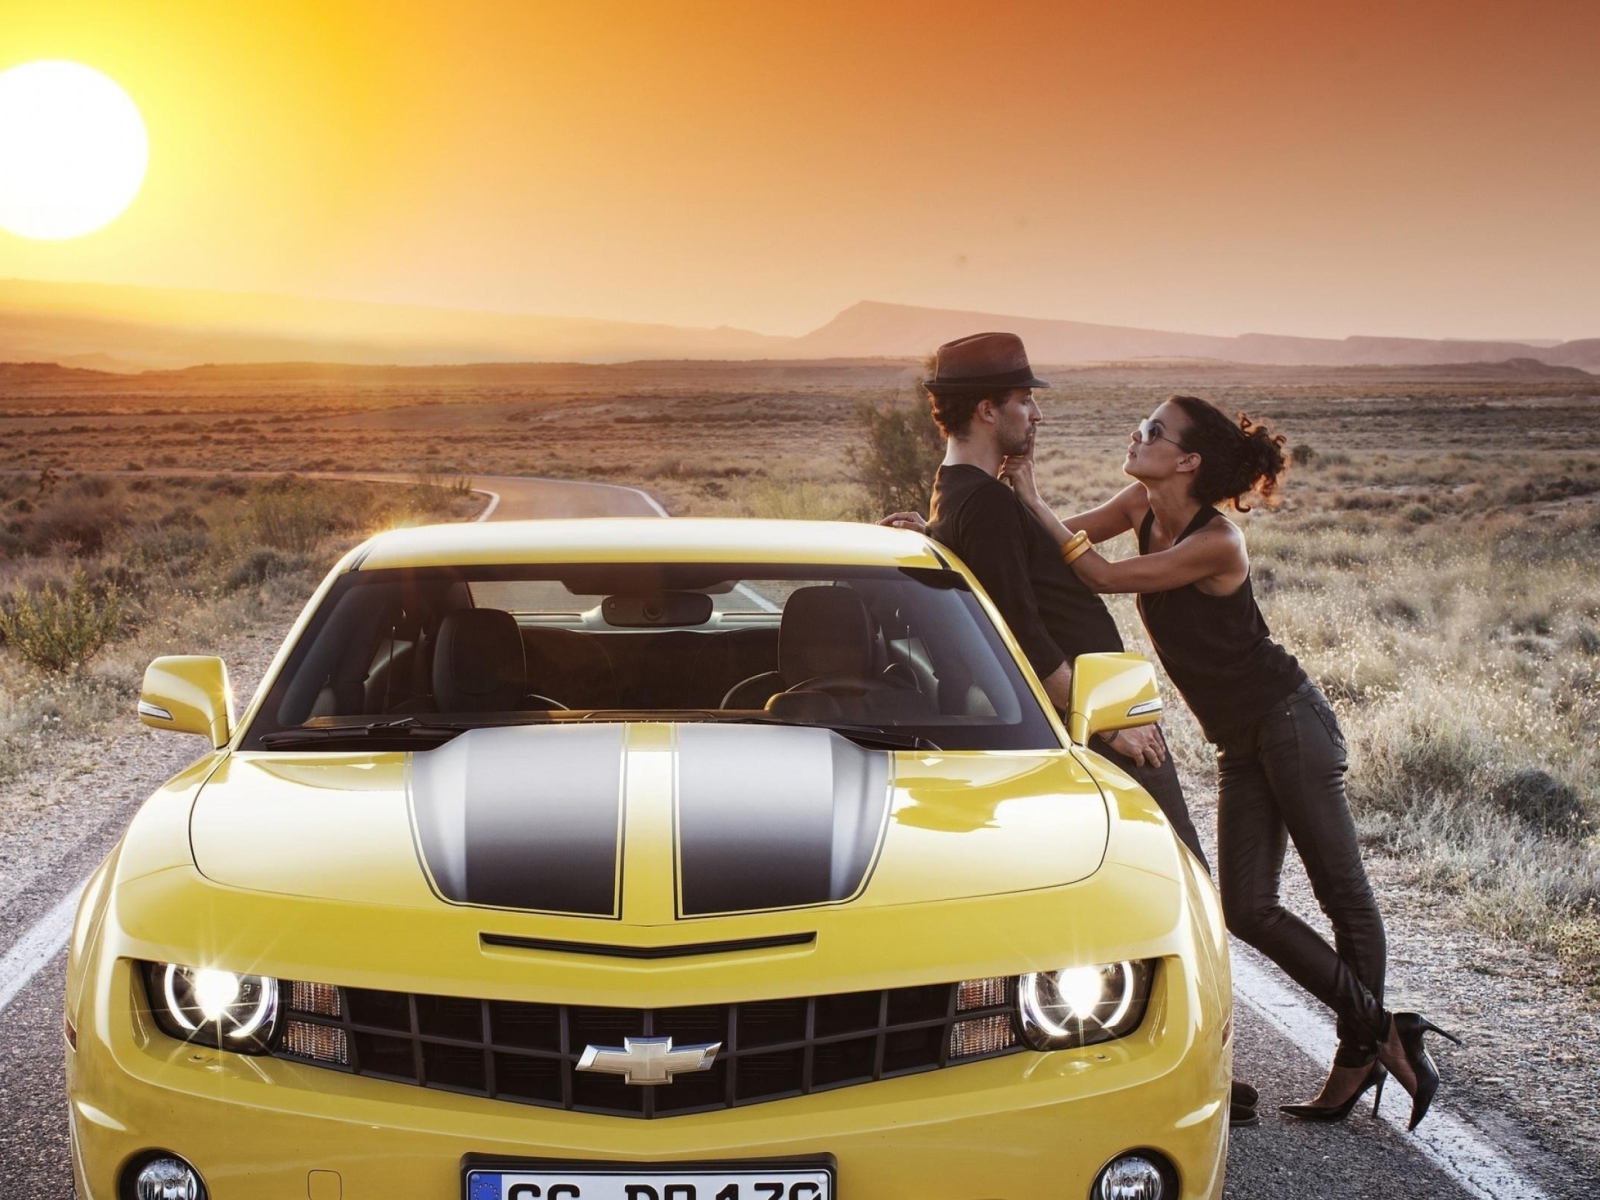 Couple And Yellow Chevrolet wallpaper 1600x1200